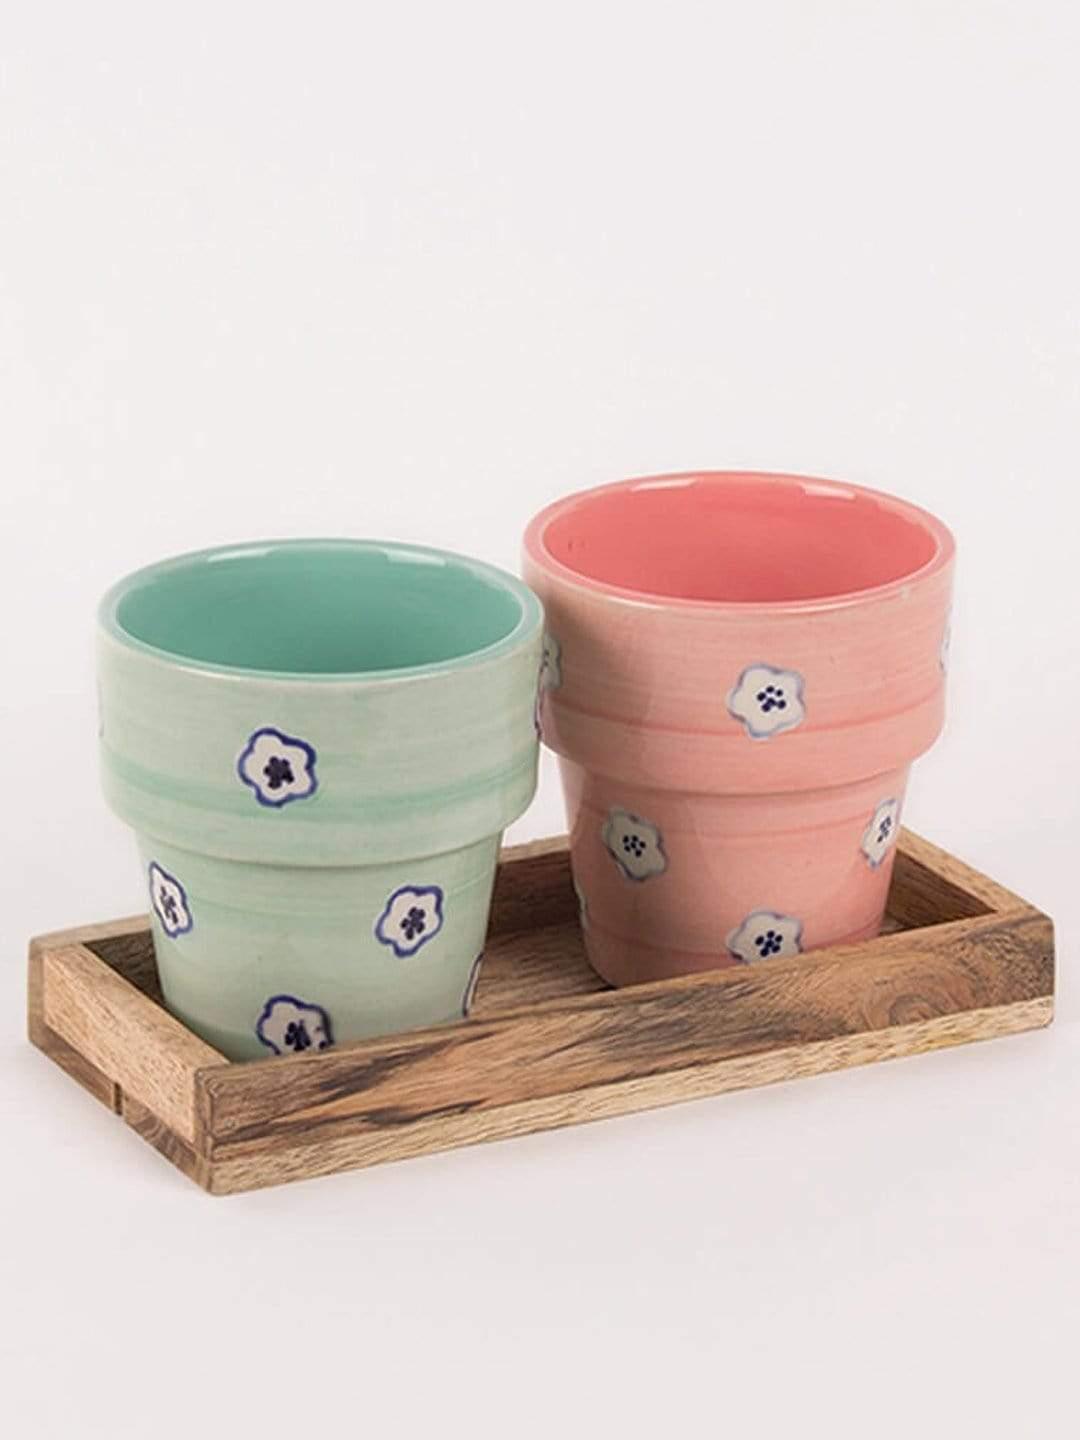 Hello Daisy Planters  With Wooden Tray -set Of 2Material: Ceramic &amp; Wood
Dimensions: 3"D inch x 3.5"H inch

 Wooden Tray -setThe Wishing Chair